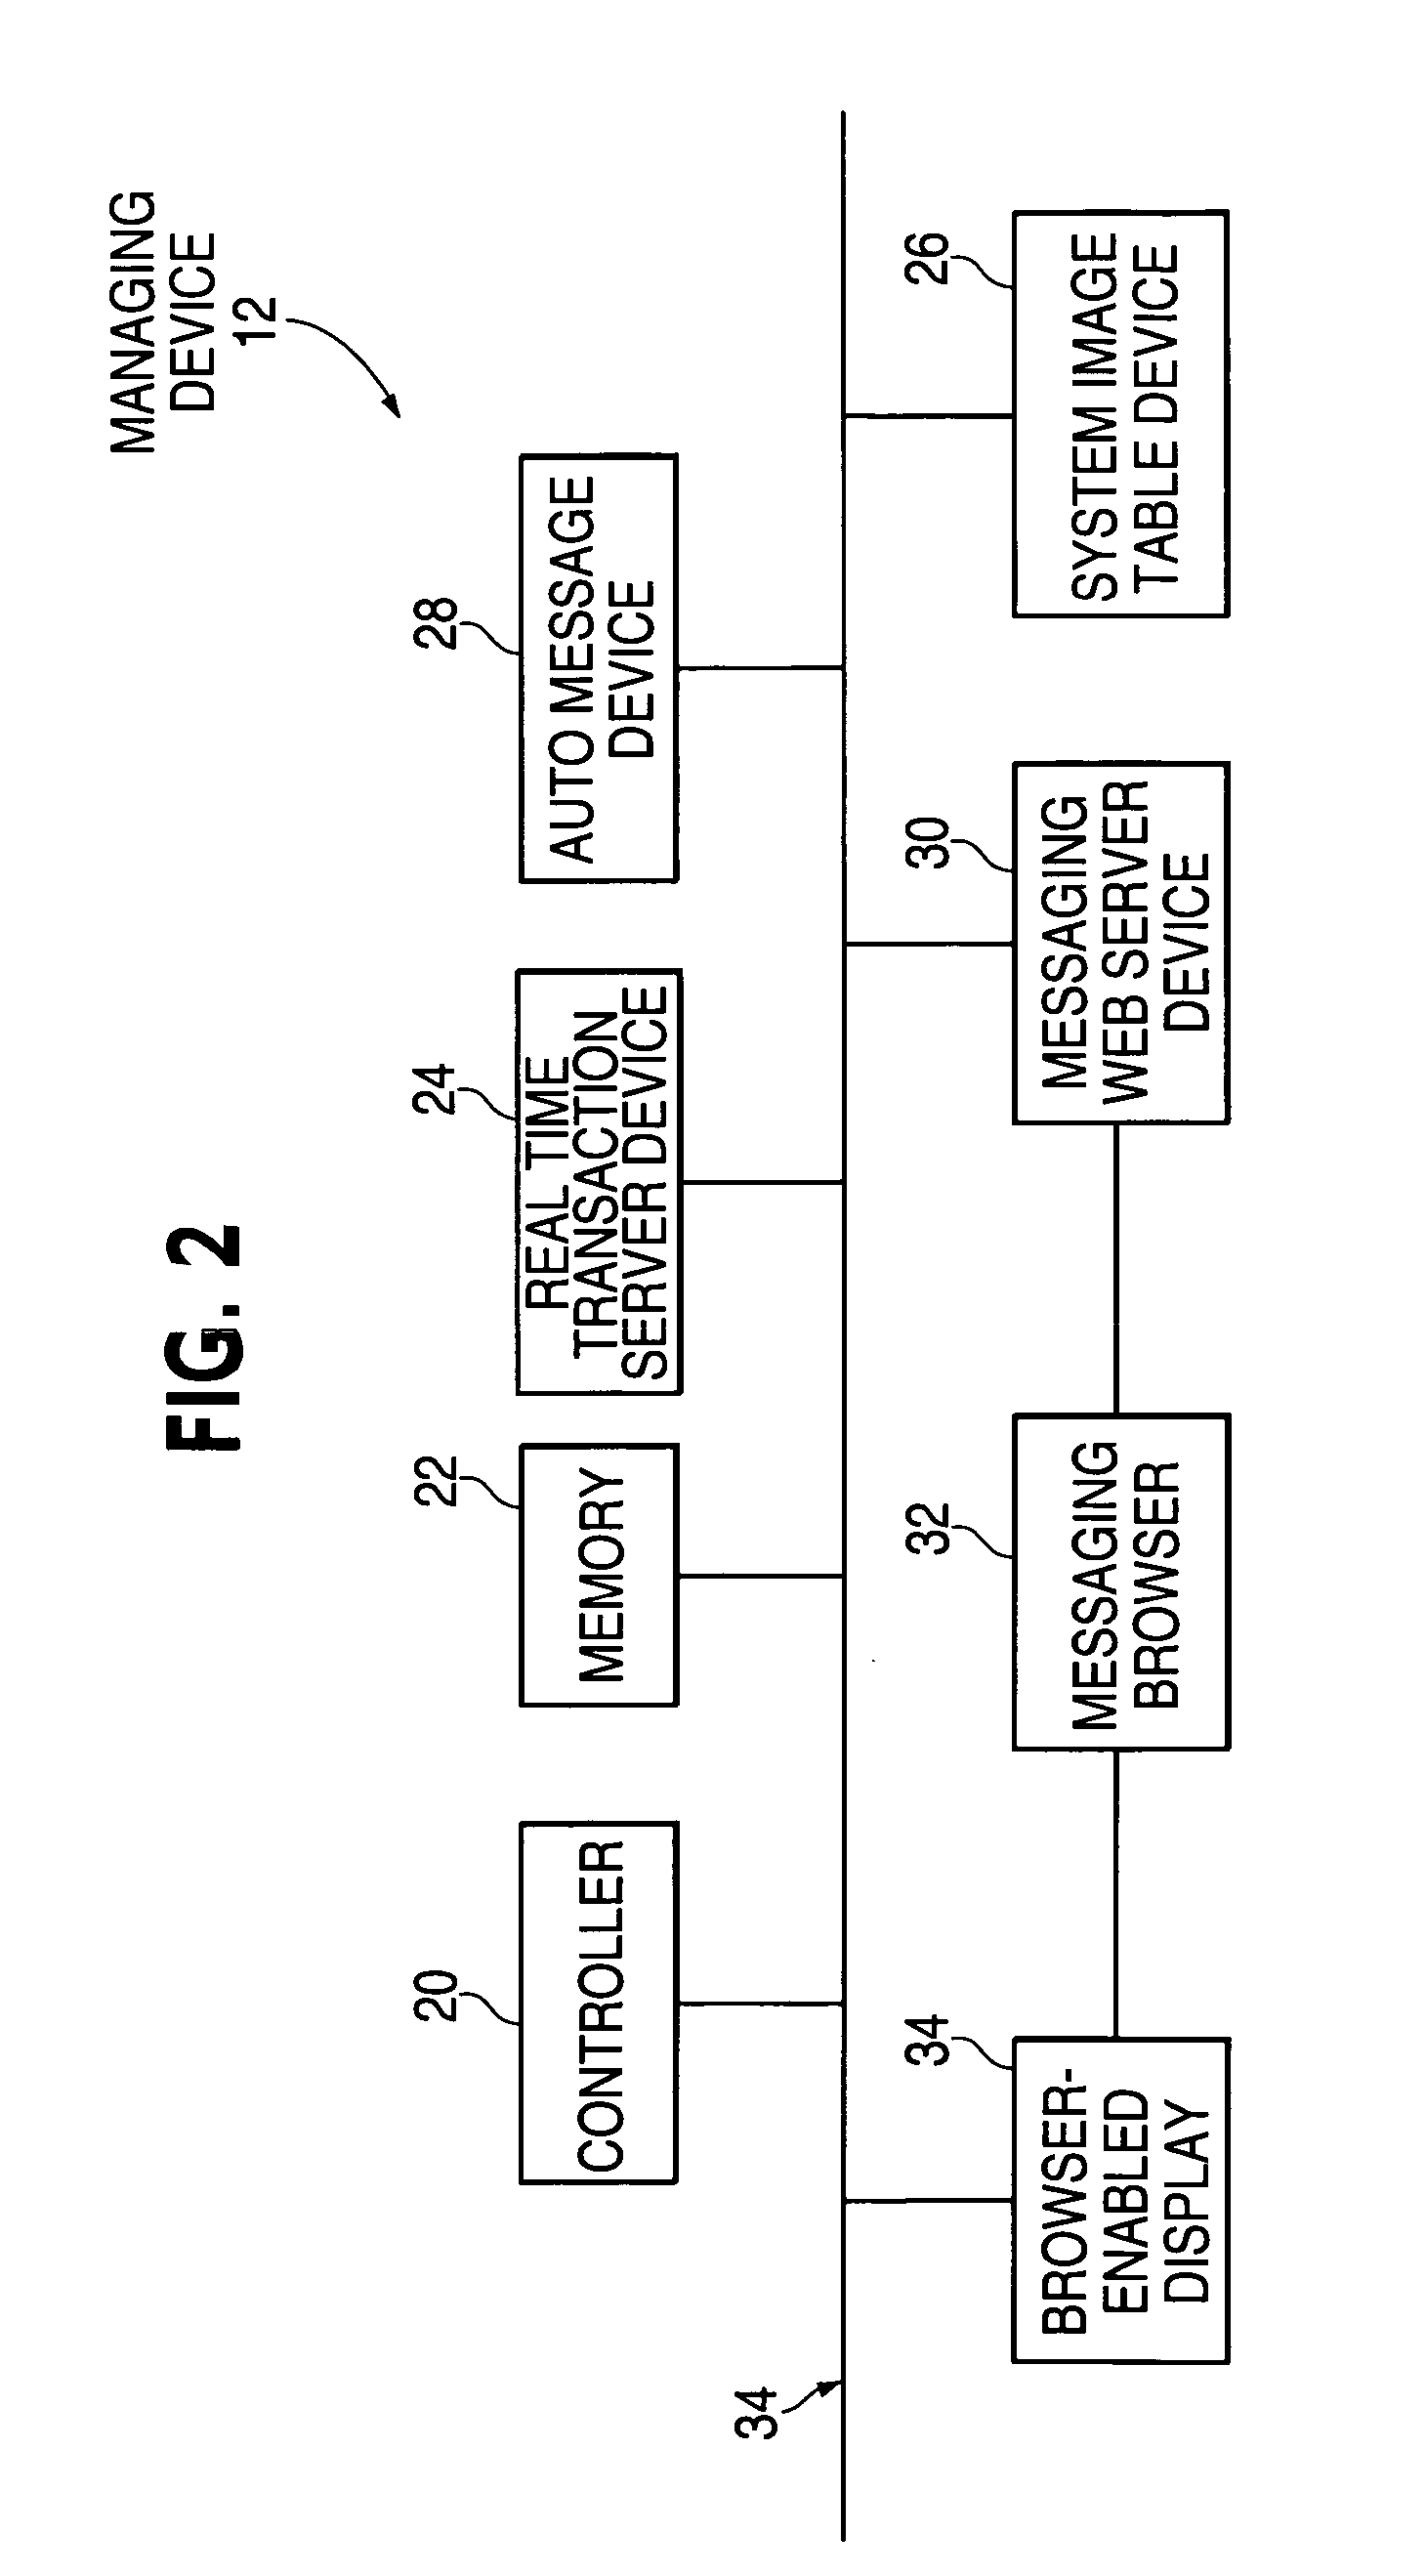 Apparatus and method for constructing and routing a message